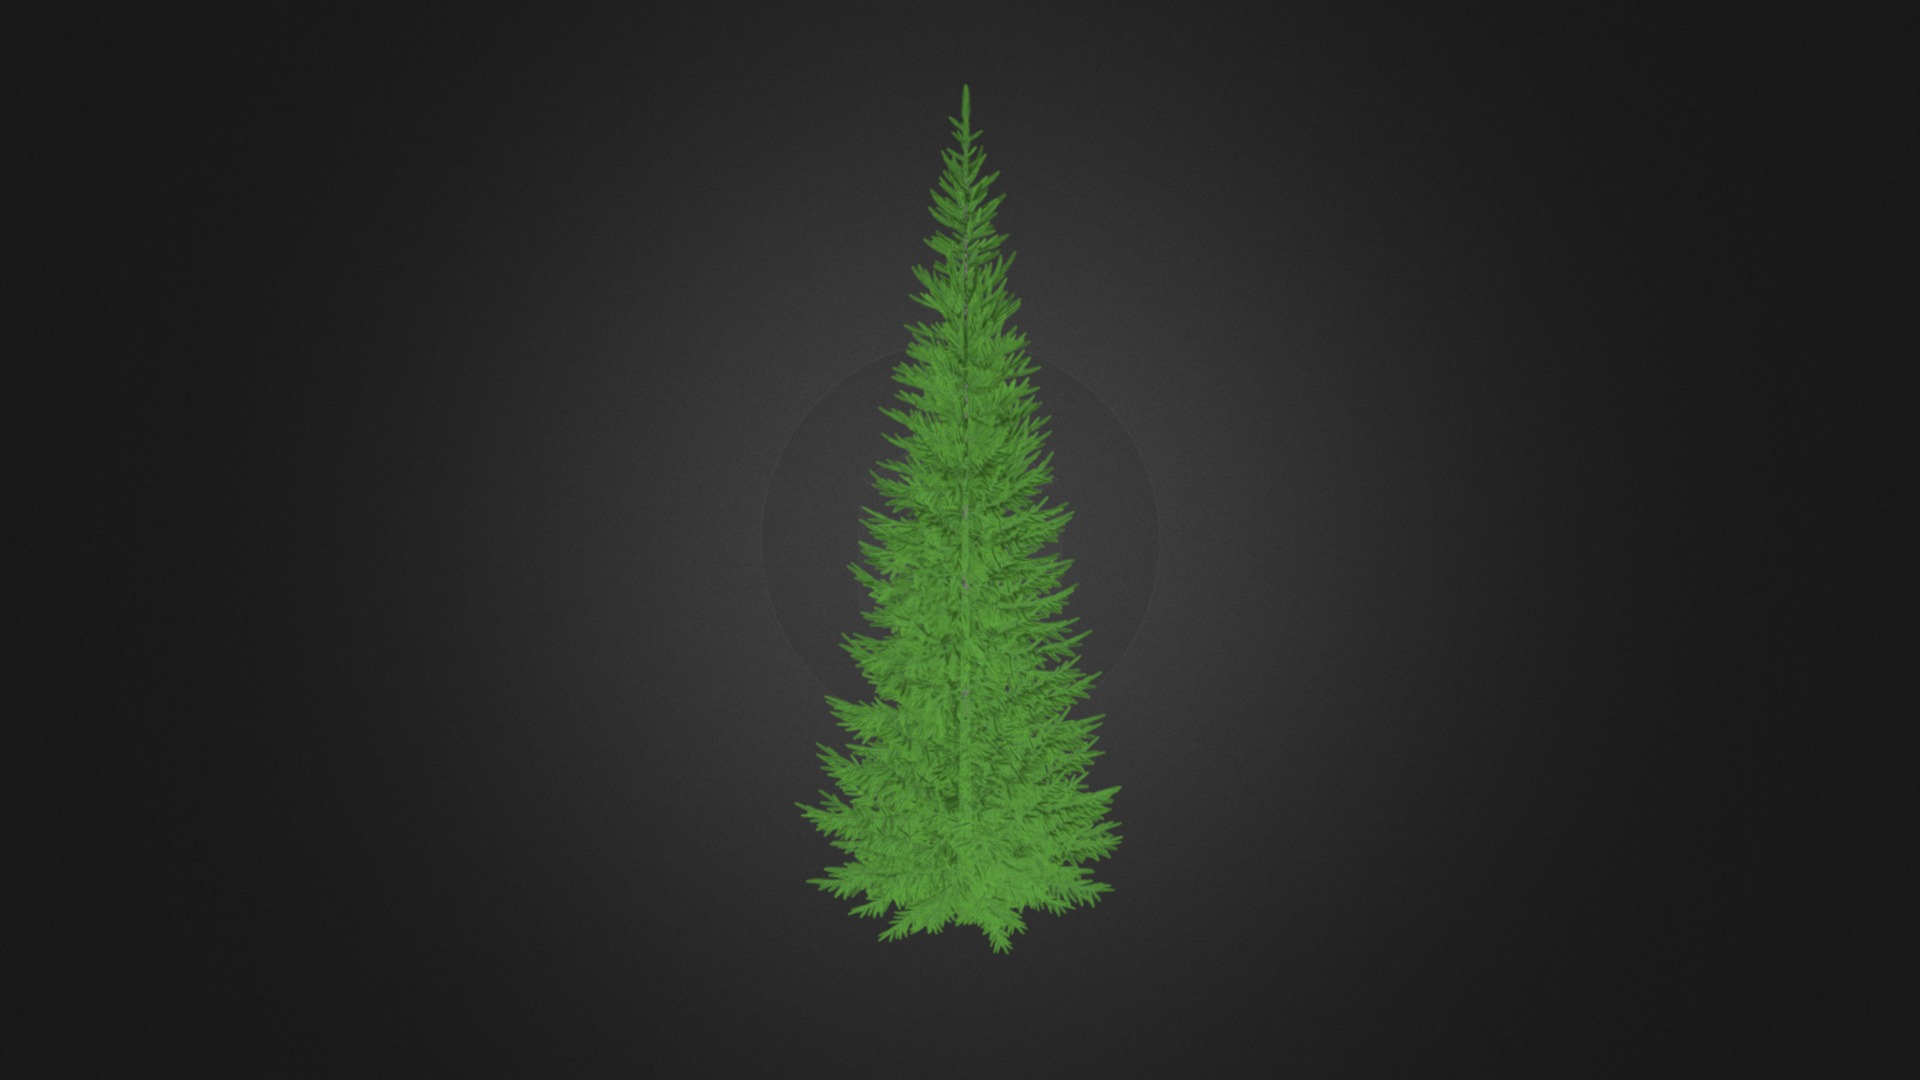 3D model Norway Spruce (Picea abies) 7.3m - This is a 3D model of the Norway Spruce (Picea abies) 7.3m. The 3D model is about a green tree with a dark background.